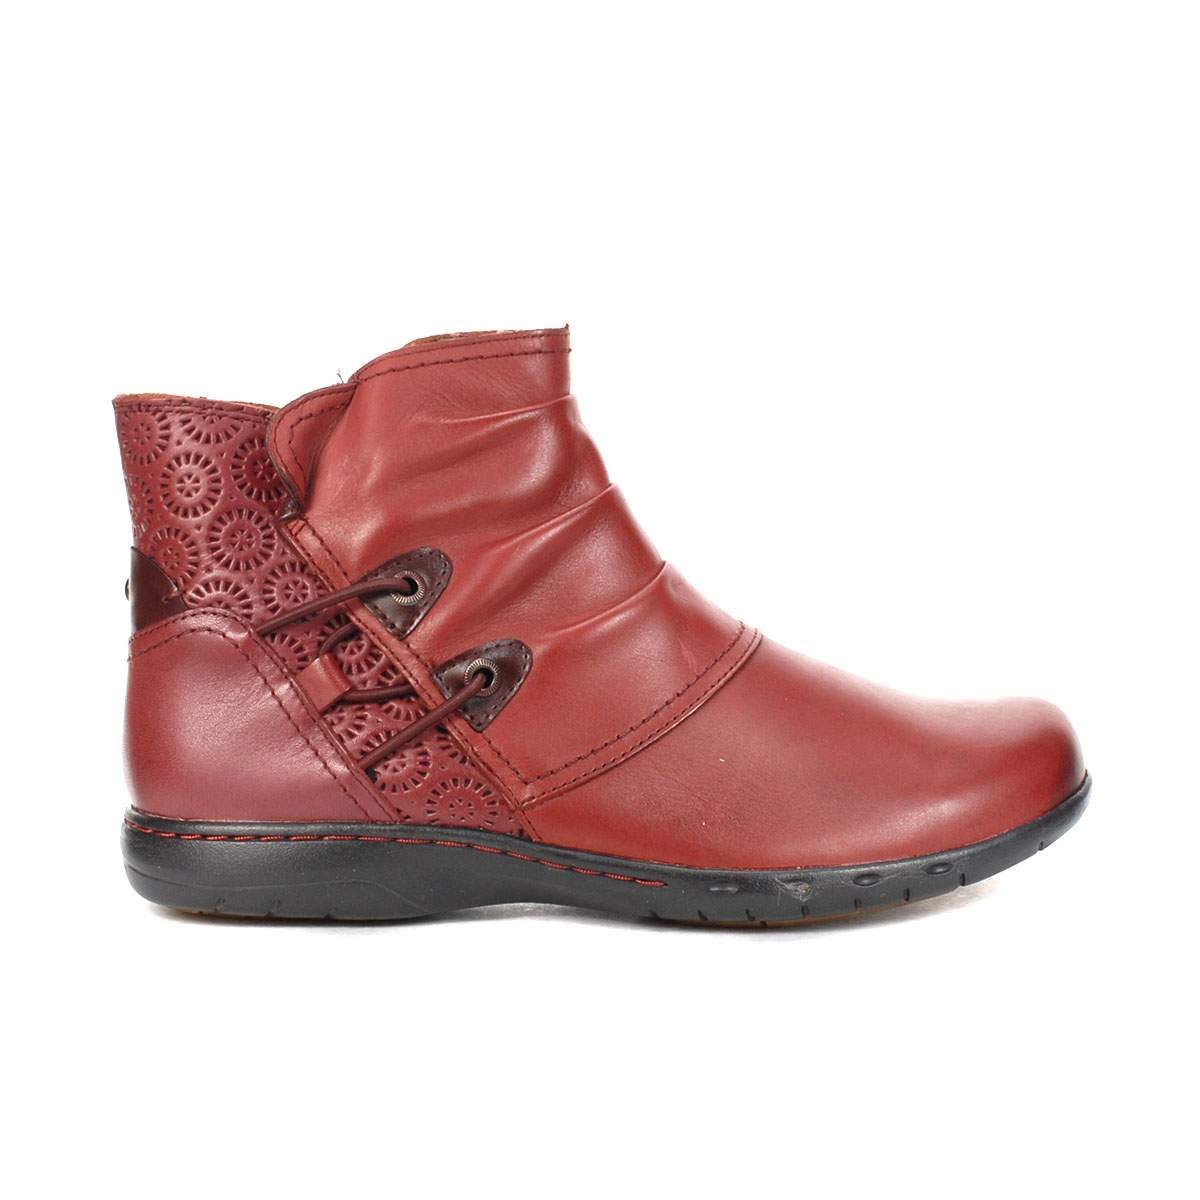 Rockport Cobb Hill Women's Ruch Red Leather Boots CI6906